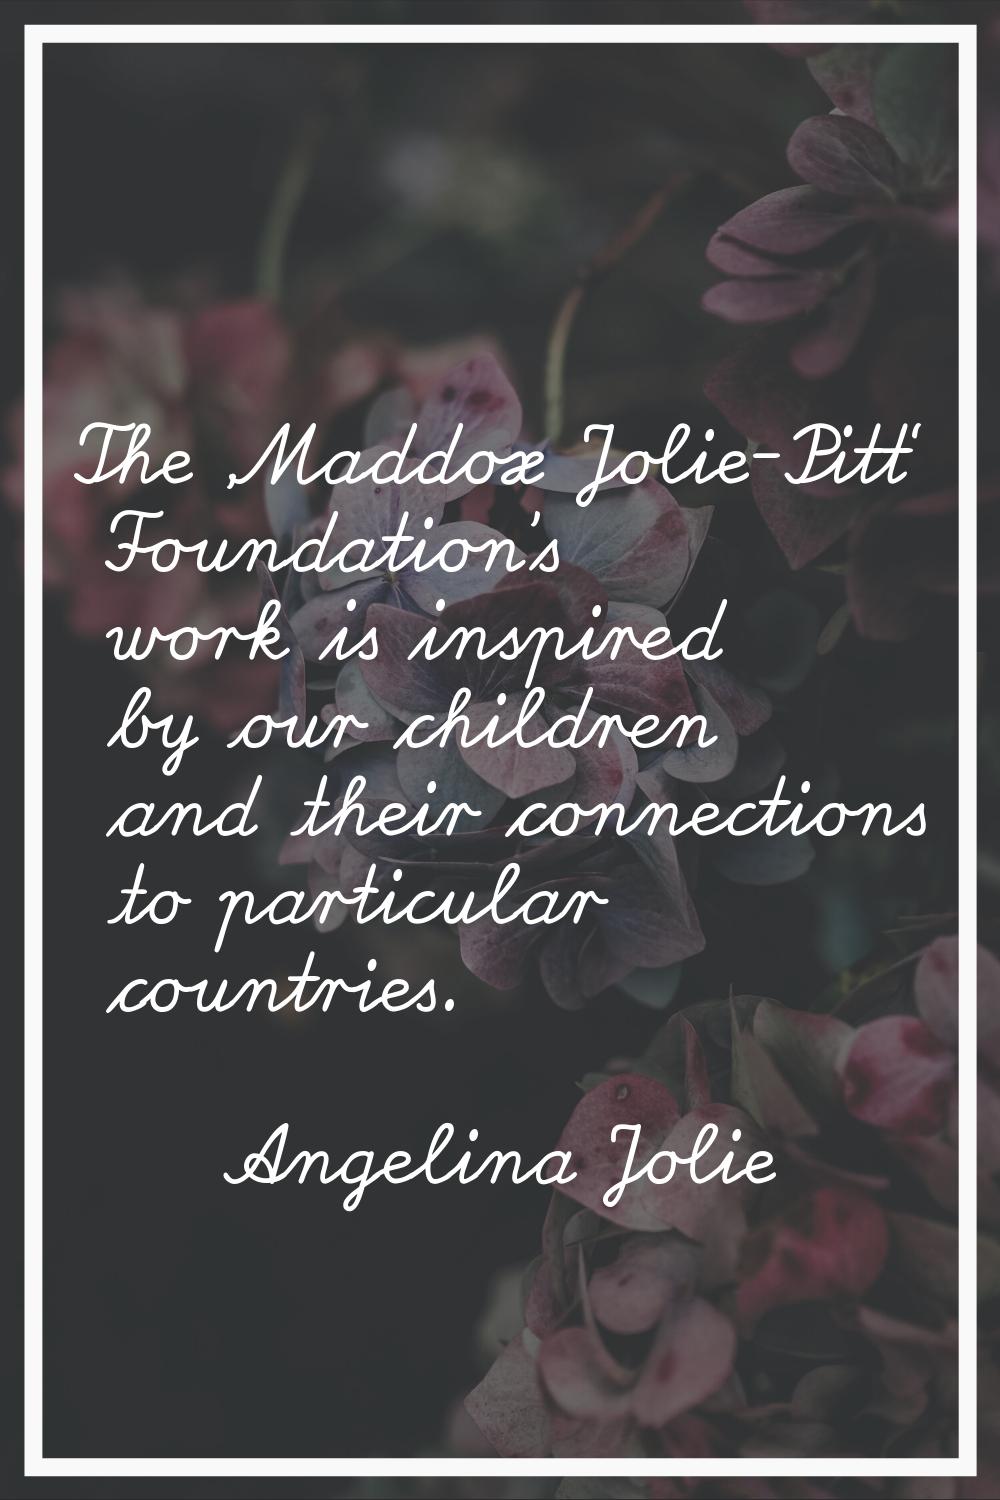 The 'Maddox Jolie-Pitt' Foundation's work is inspired by our children and their connections to part